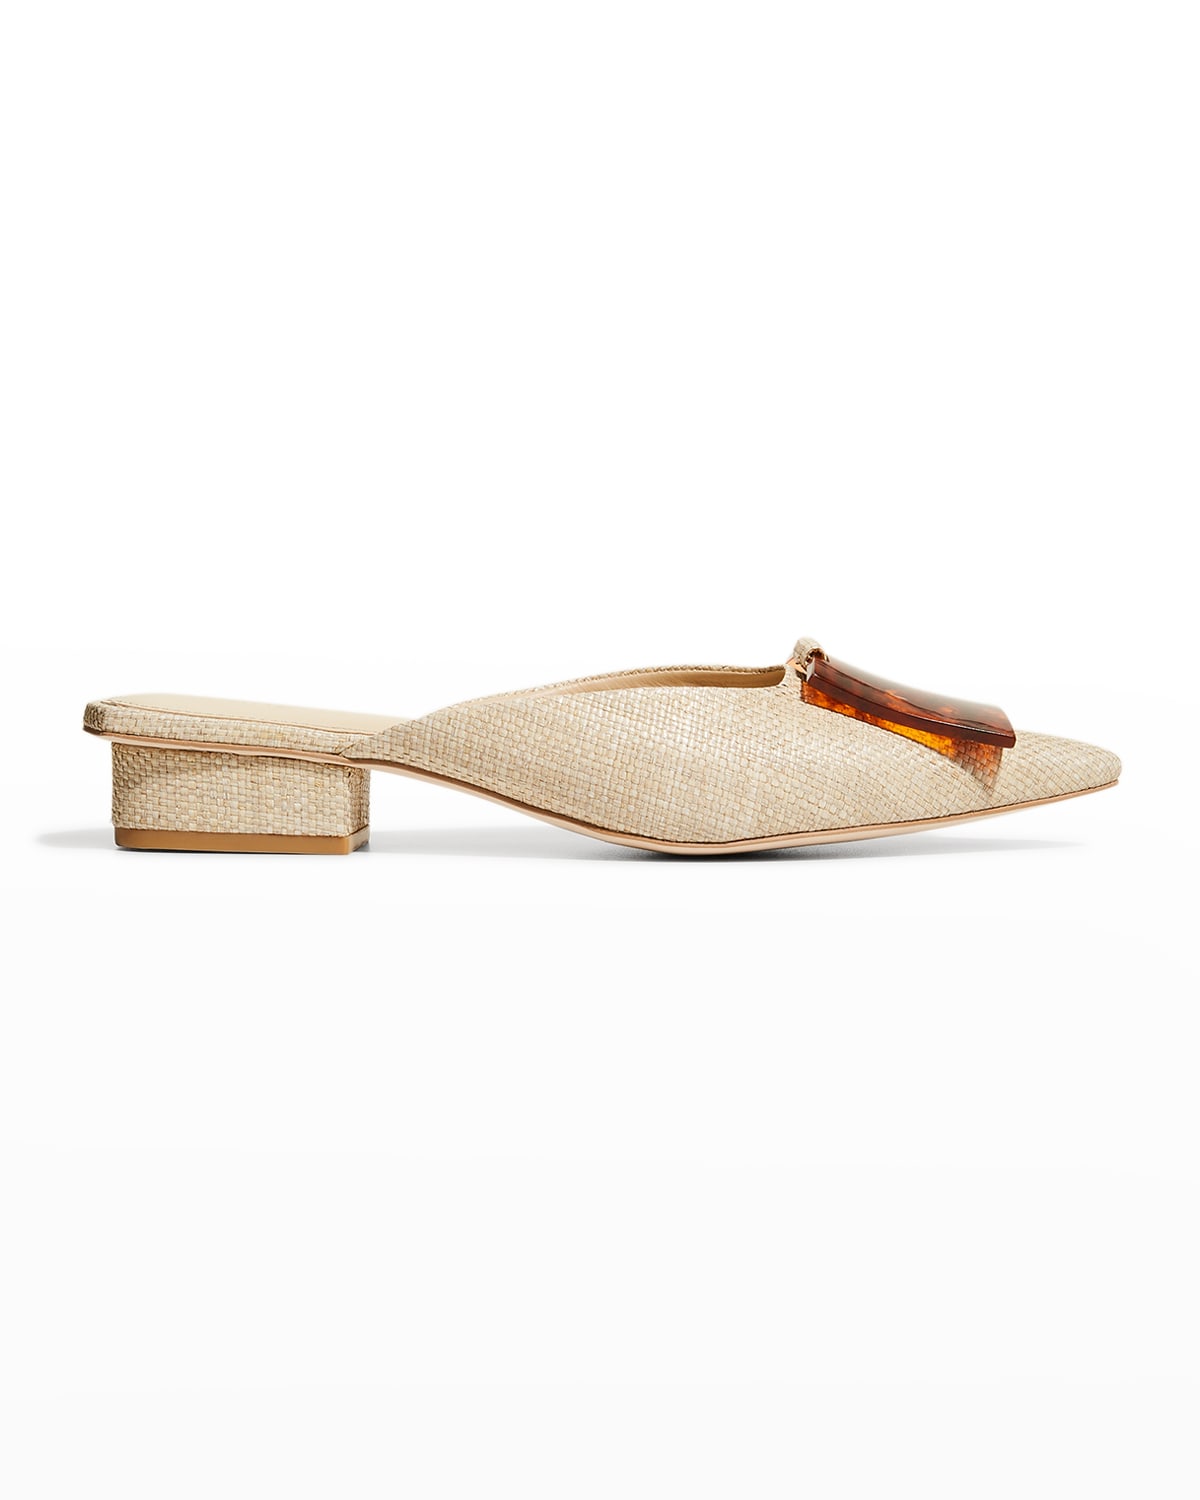 Cult Gaia May Pointed Woven Fabric Slide Mules